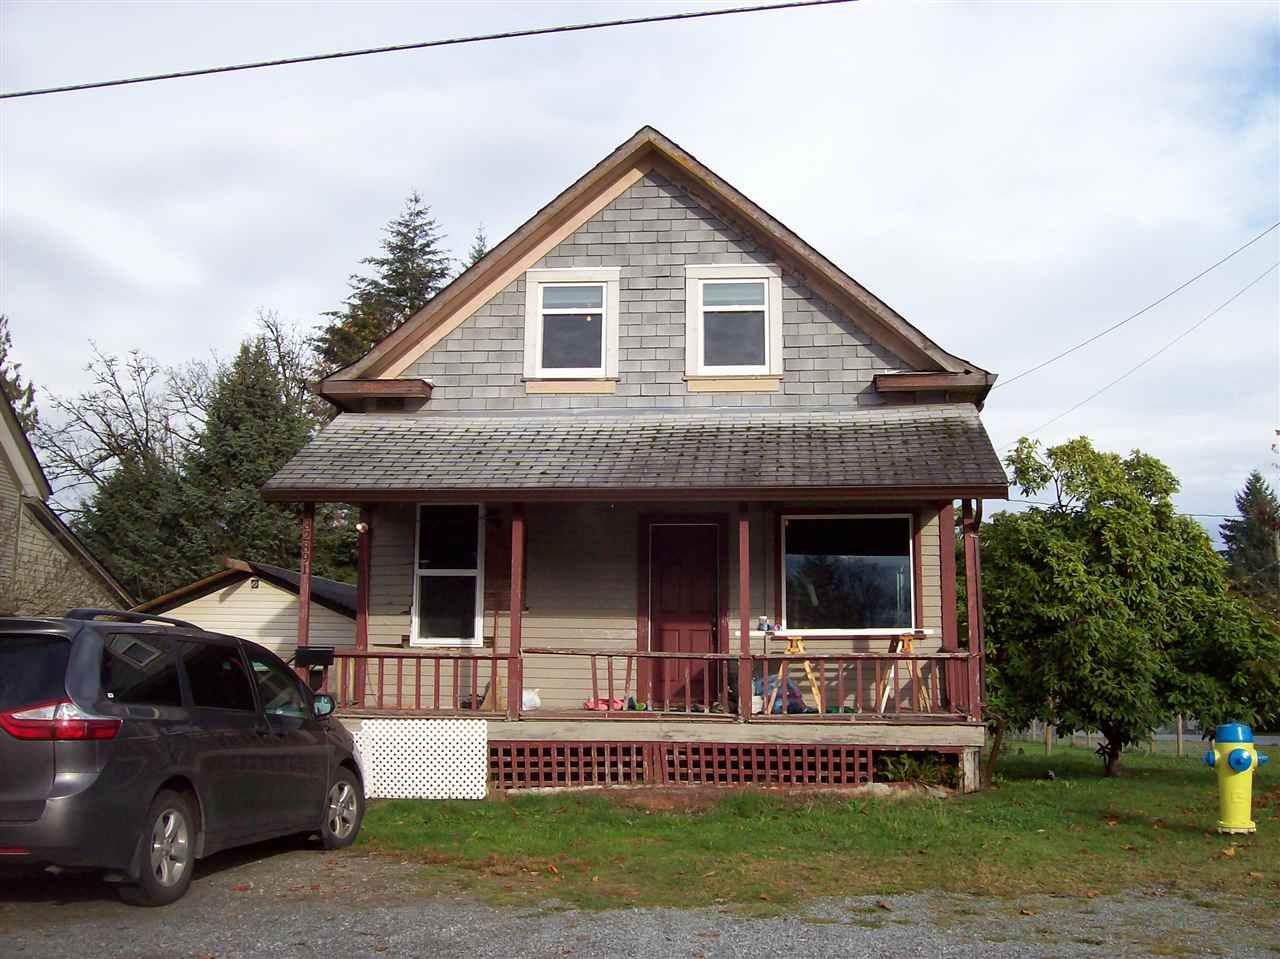 Main Photo: 32891 5TH AVENUE in Mission: Mission BC House for sale : MLS®# R2121909